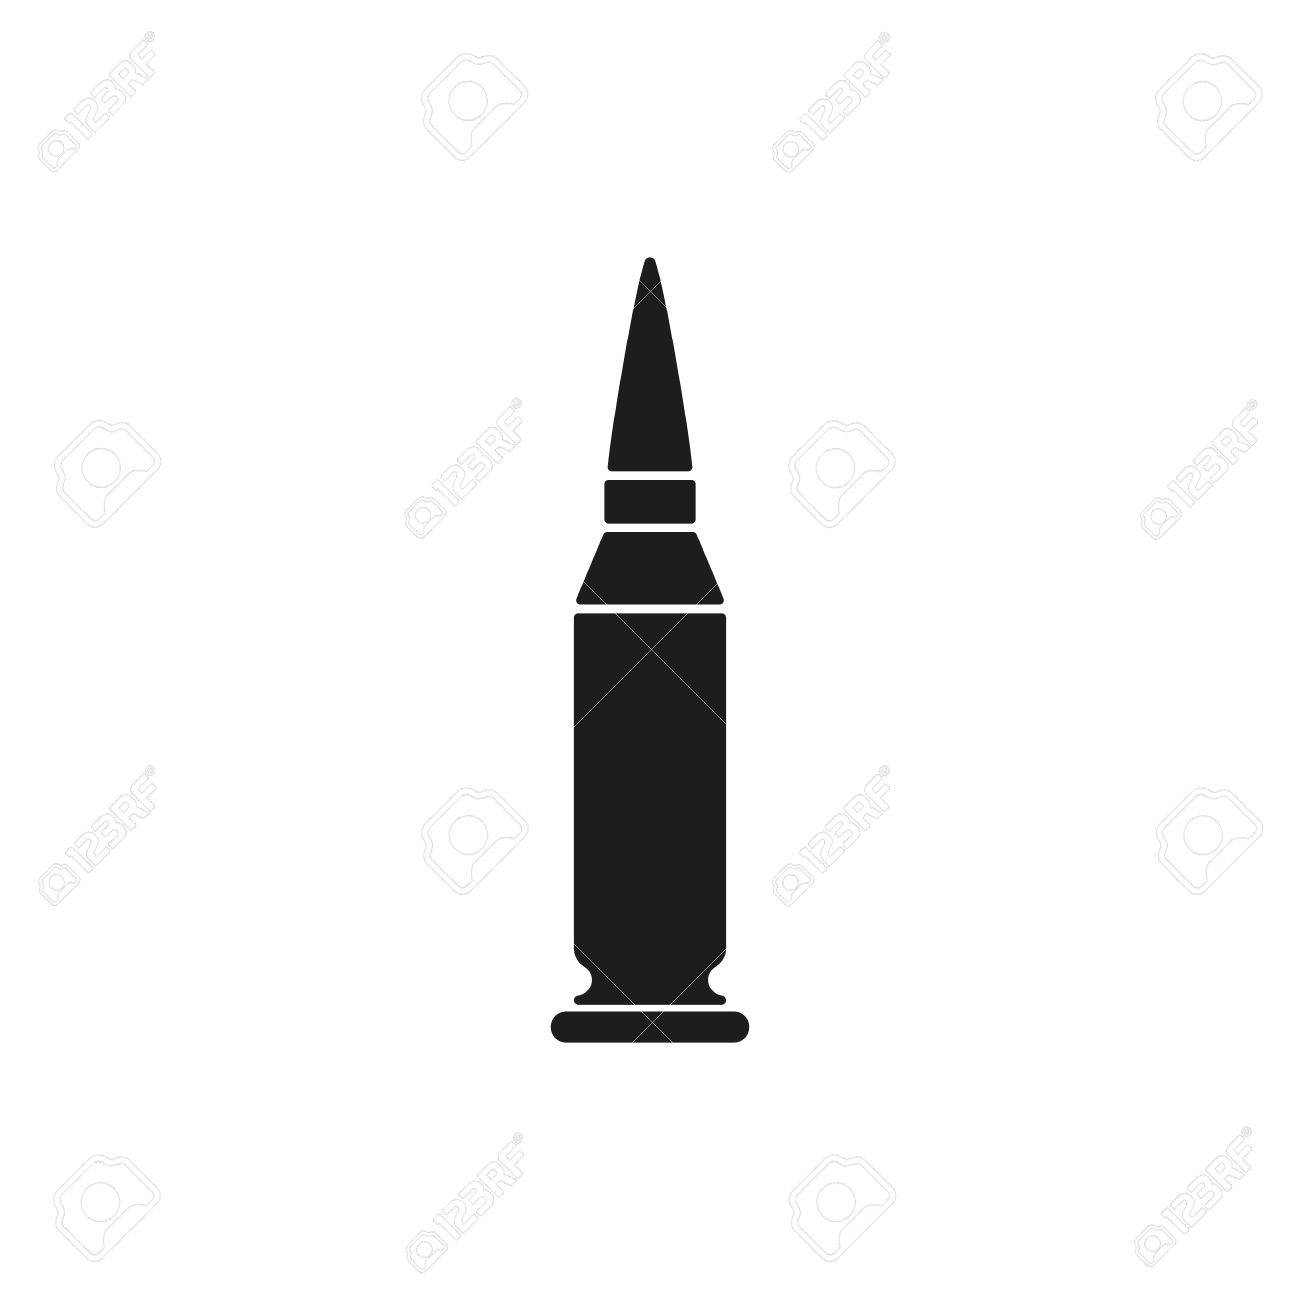 The Bullet Icon Royalty Free Cliparts, Vectors, And Stock 